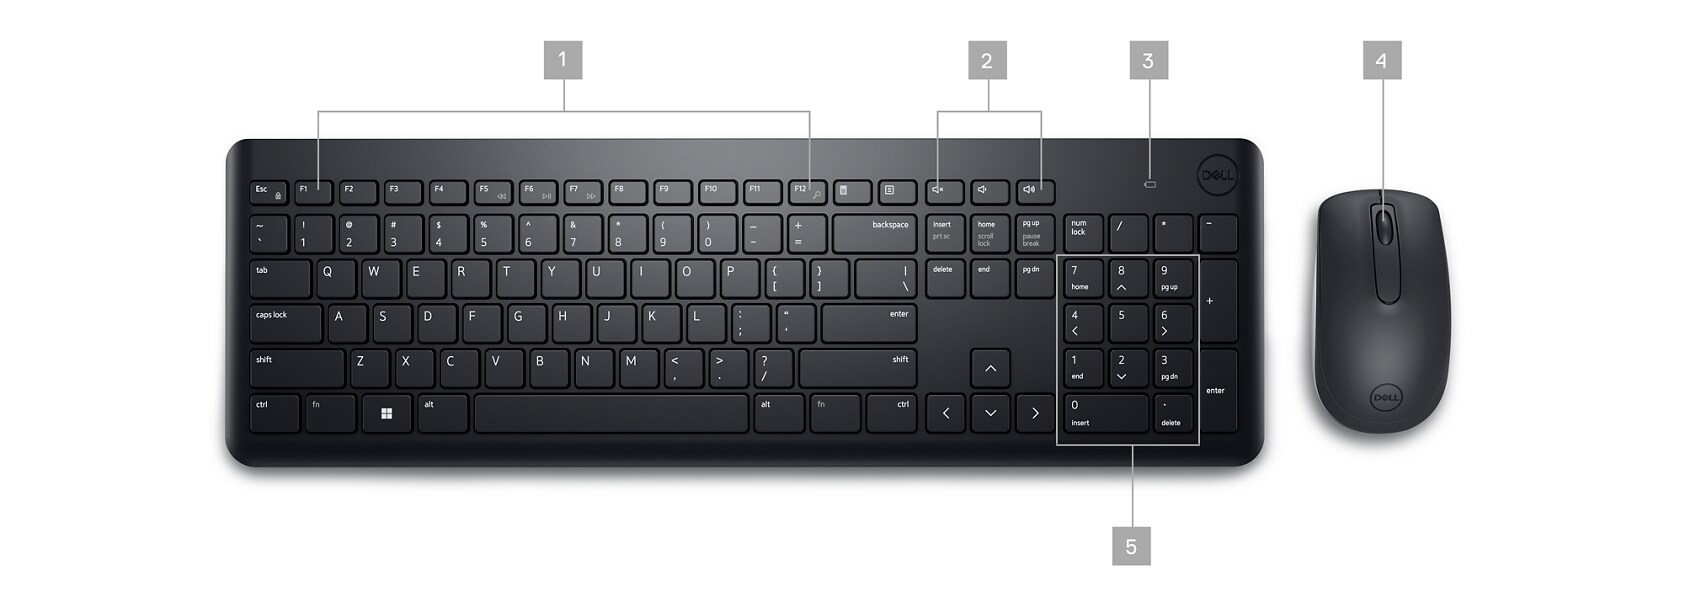 https://i.dell.com/is/image/DellContent/content/dam/ss2/product-images/peripherals/input-devices/dell/keyboards/km3322w/pdp/product-features-km3322w.psd?qlt=95&fit=constrain%2c1&hei=600&fmt=jpg